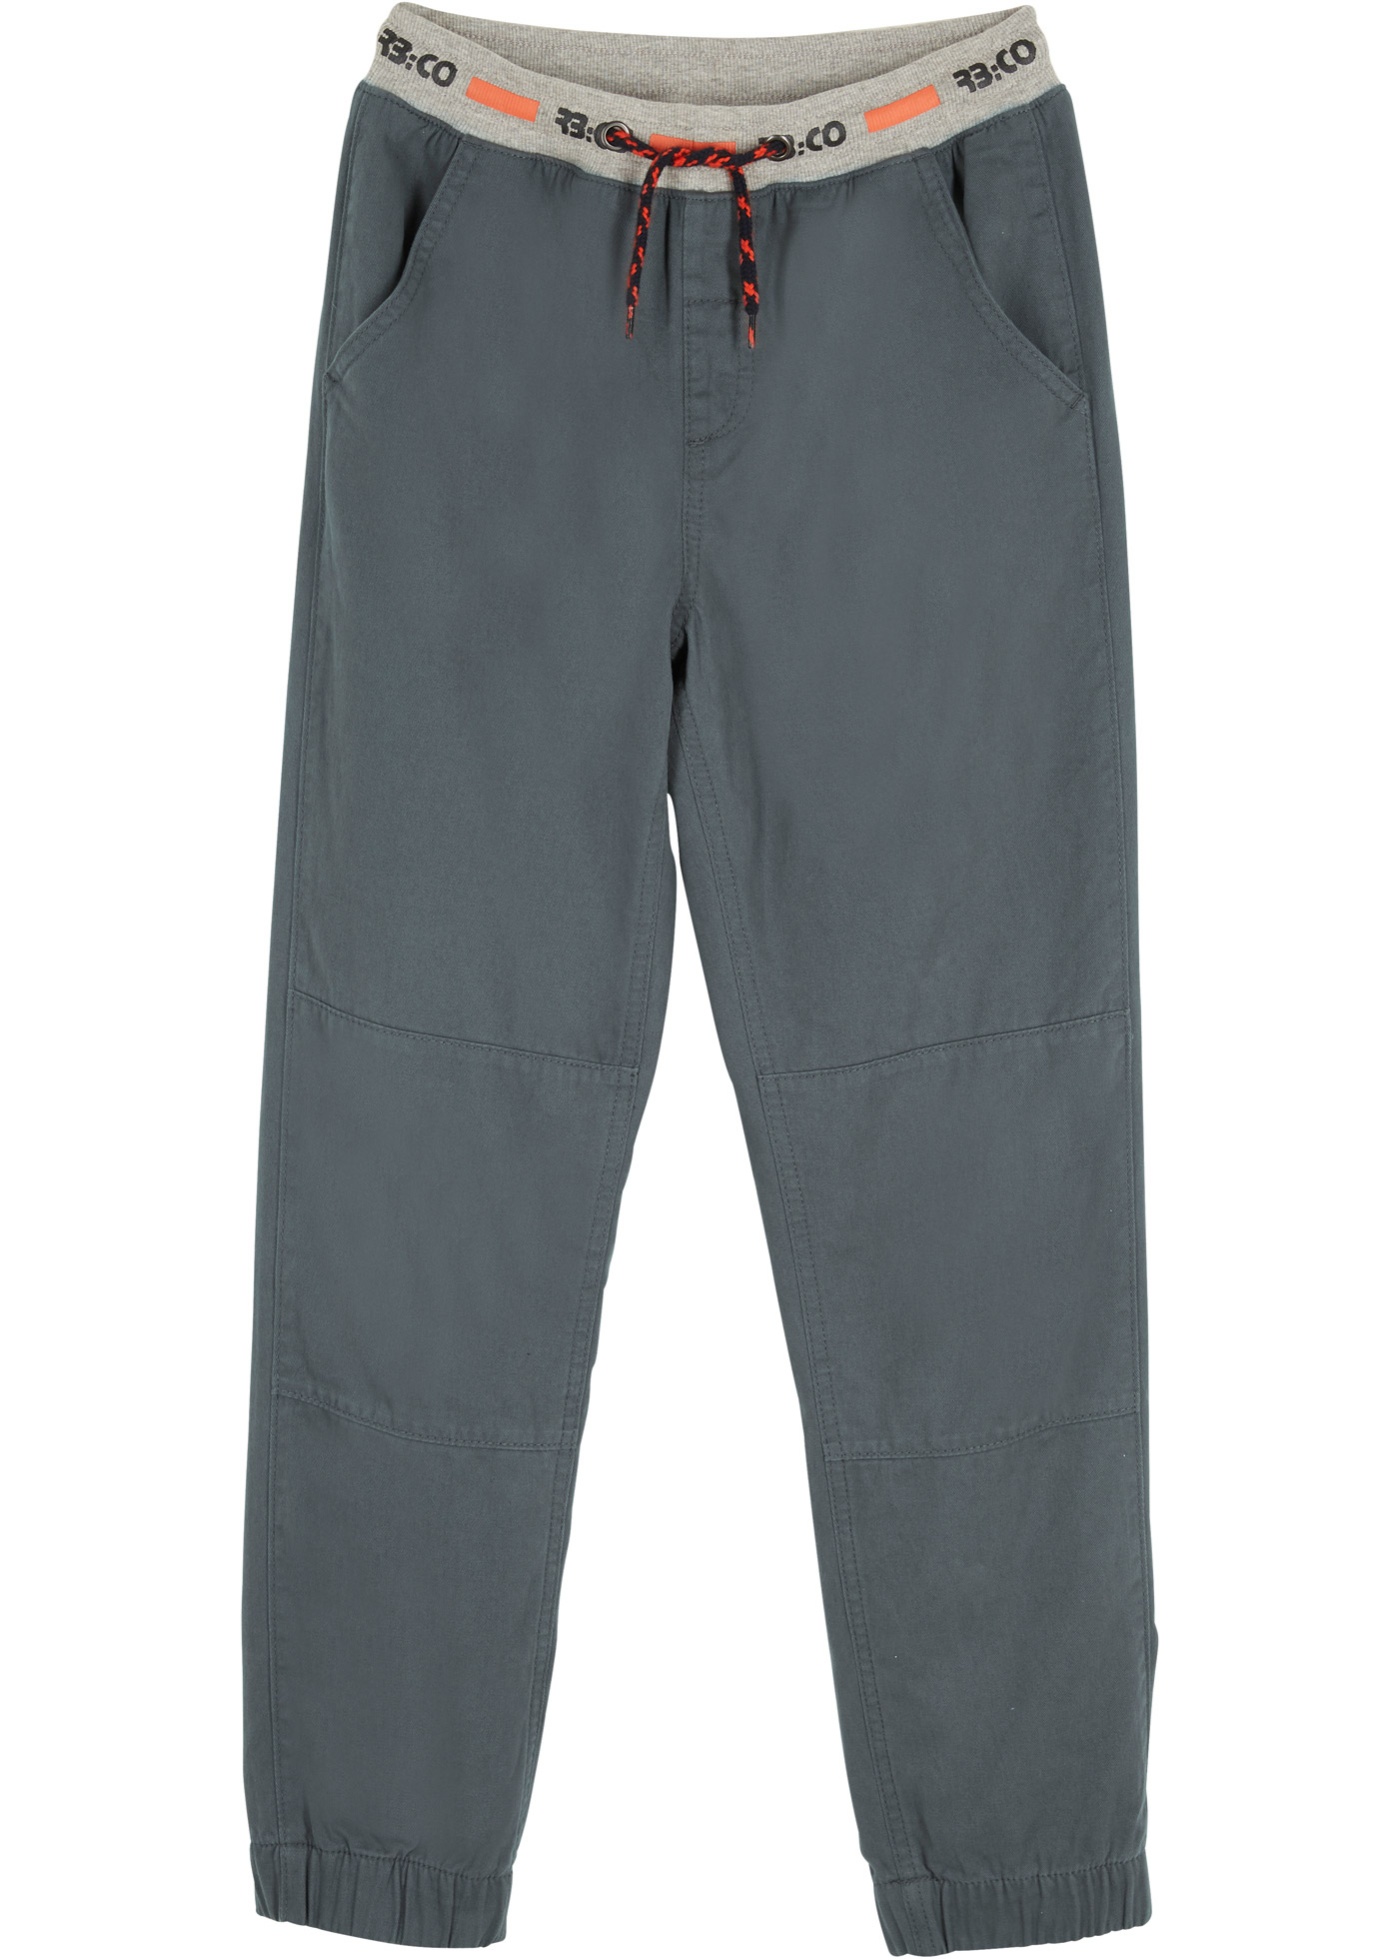 Jungen Thermohose, Loose Fit